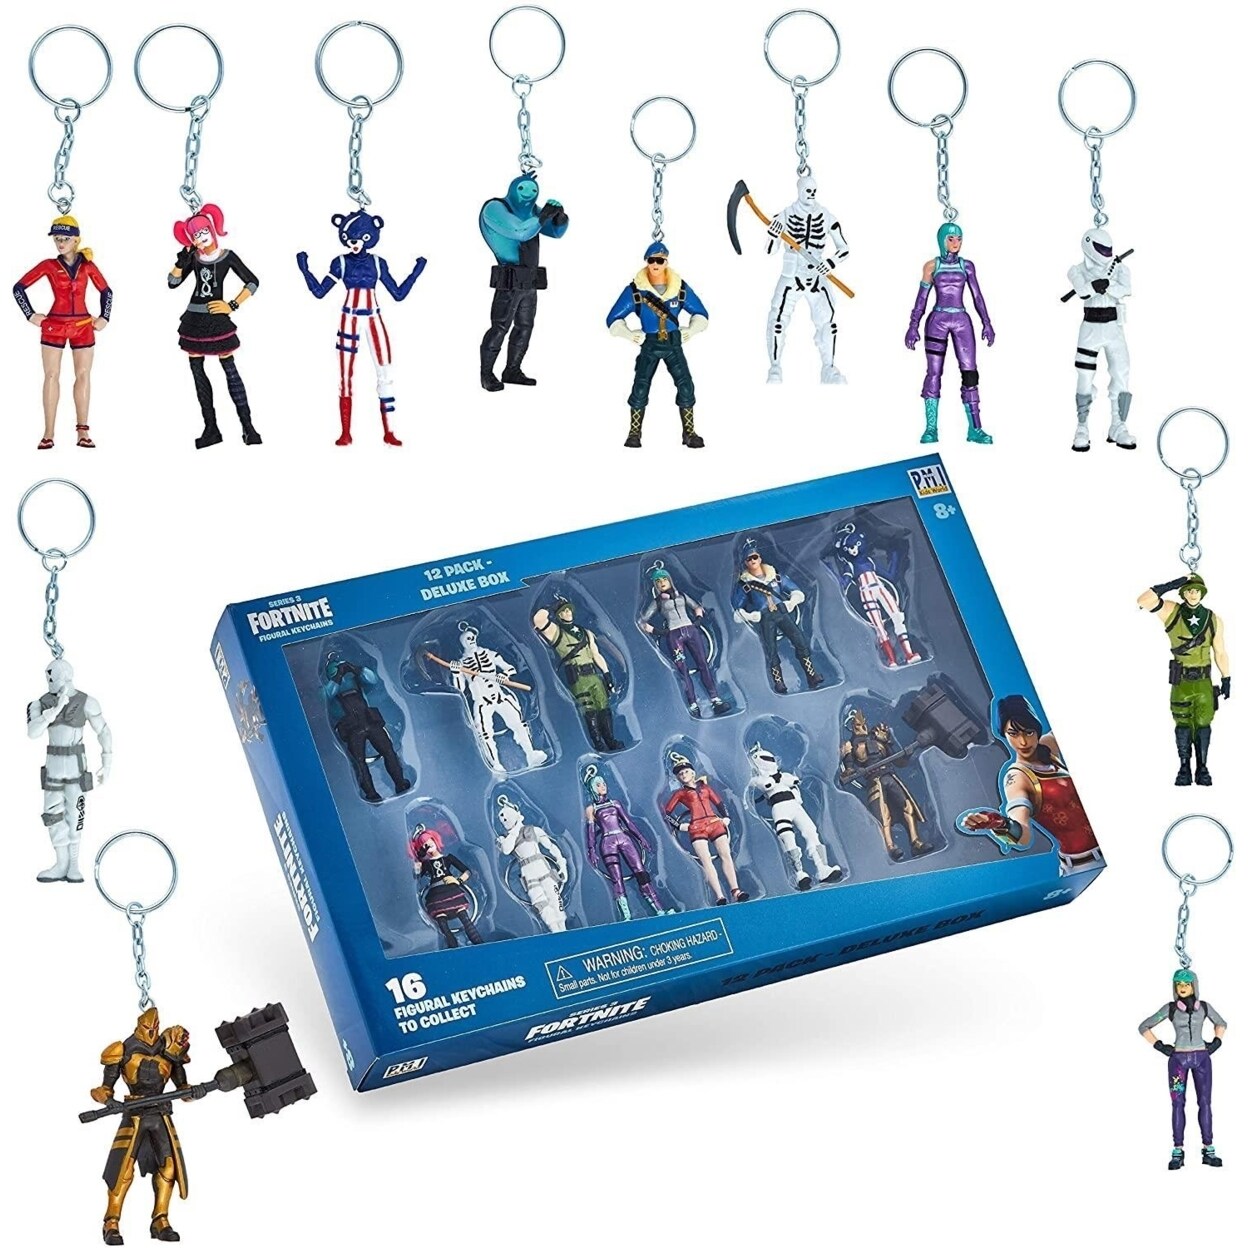 PMI International Fortnite Battle Royale Keychains 12pk Collectible Deluxe Box Character Figures